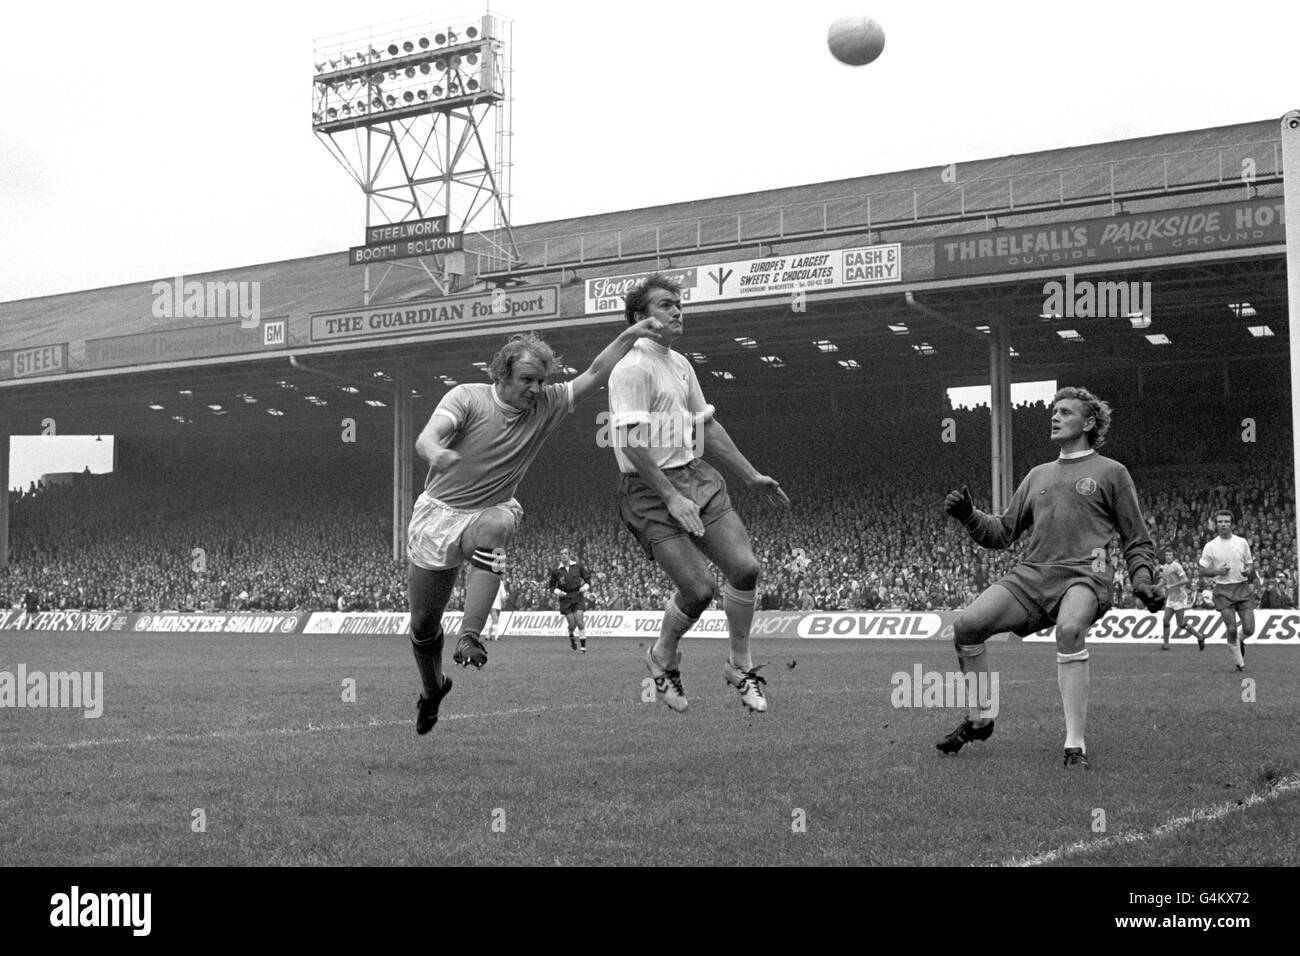 Soccer - League Division One - Manchester City v Leeds Unite - Maine Road. Leeds United defender Terry Cooper (c) clears the ball away from Manchester City's Francis Lee (l), watched by goalkeeper Gary Sprake. Stock Photo